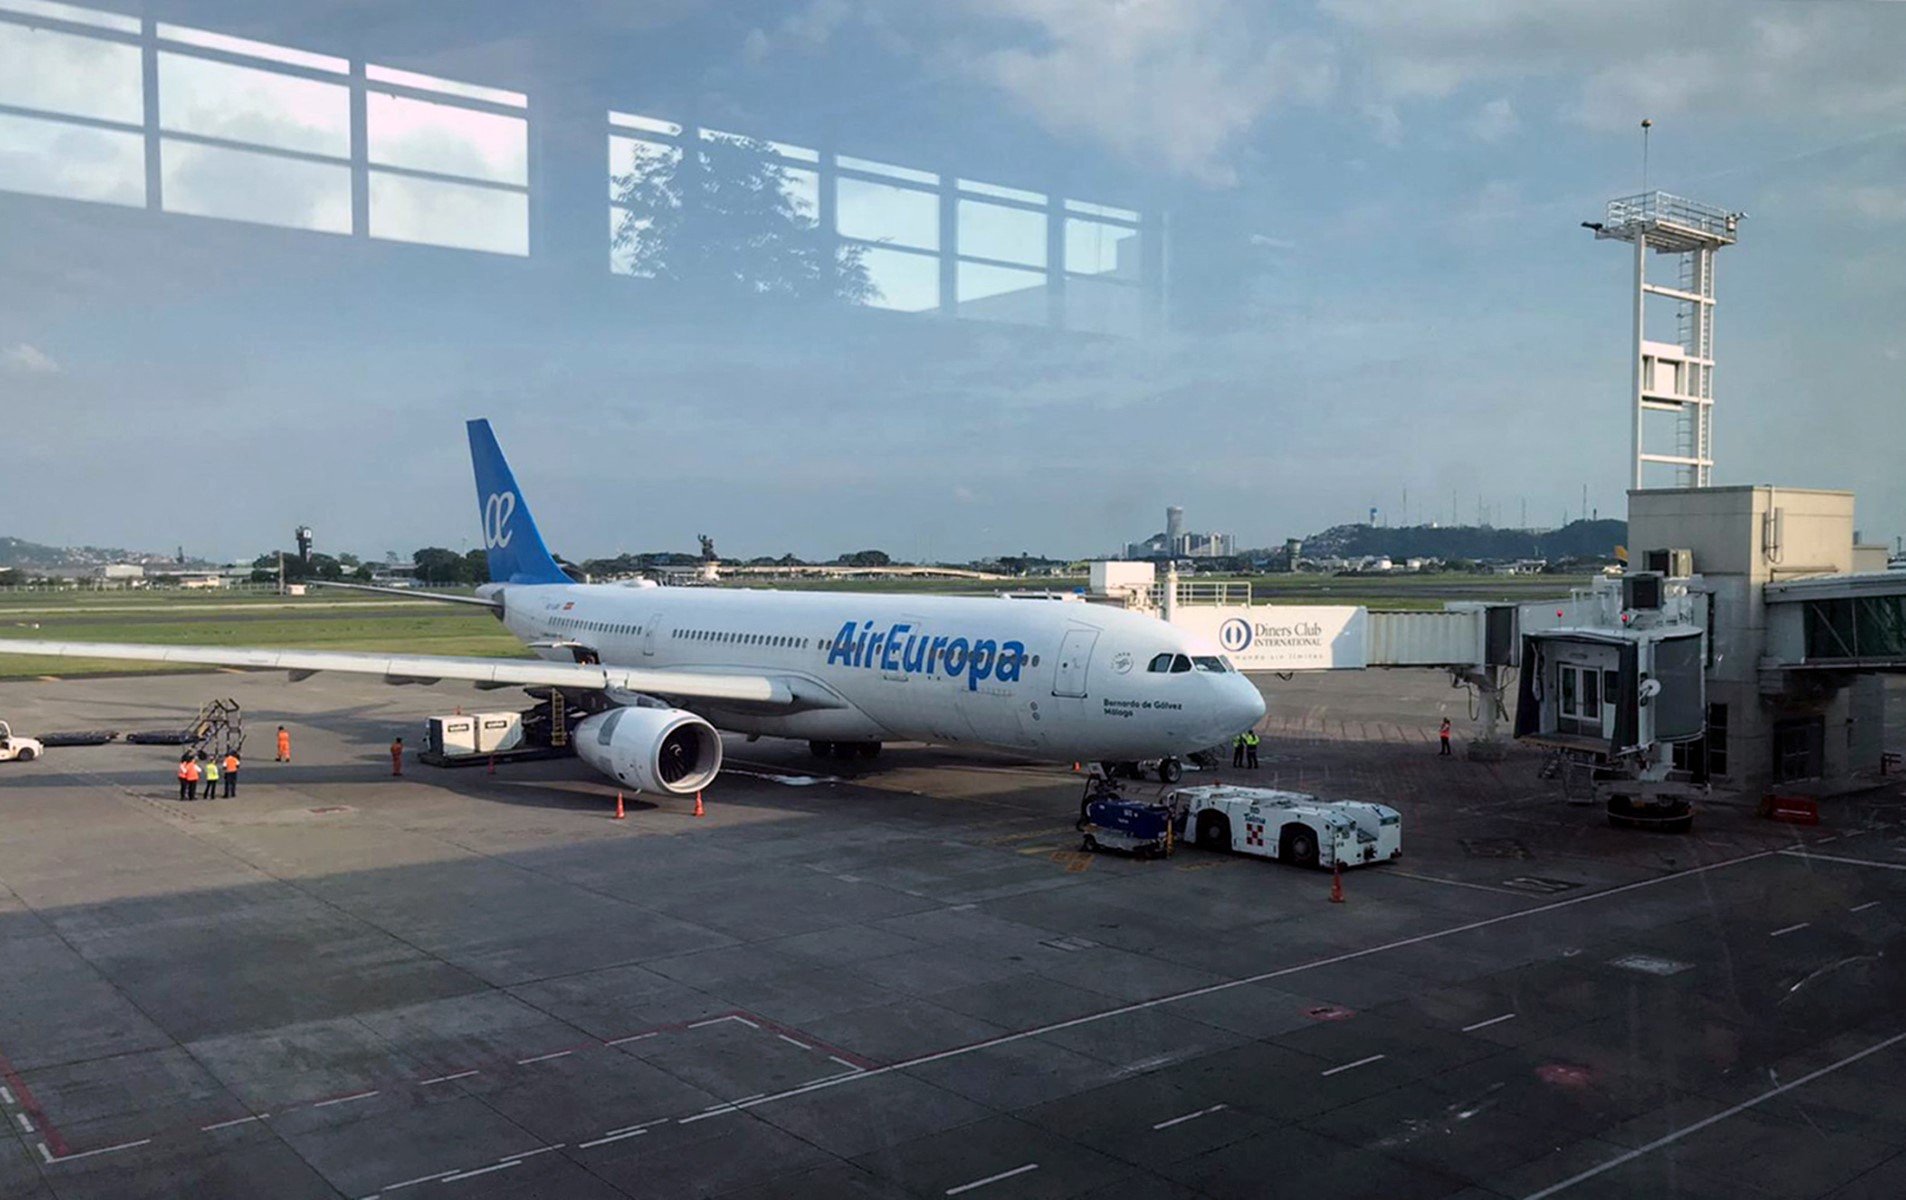 Spain's Air Europa faces losing 40% of its routes in IAG takeover bid thumbnail